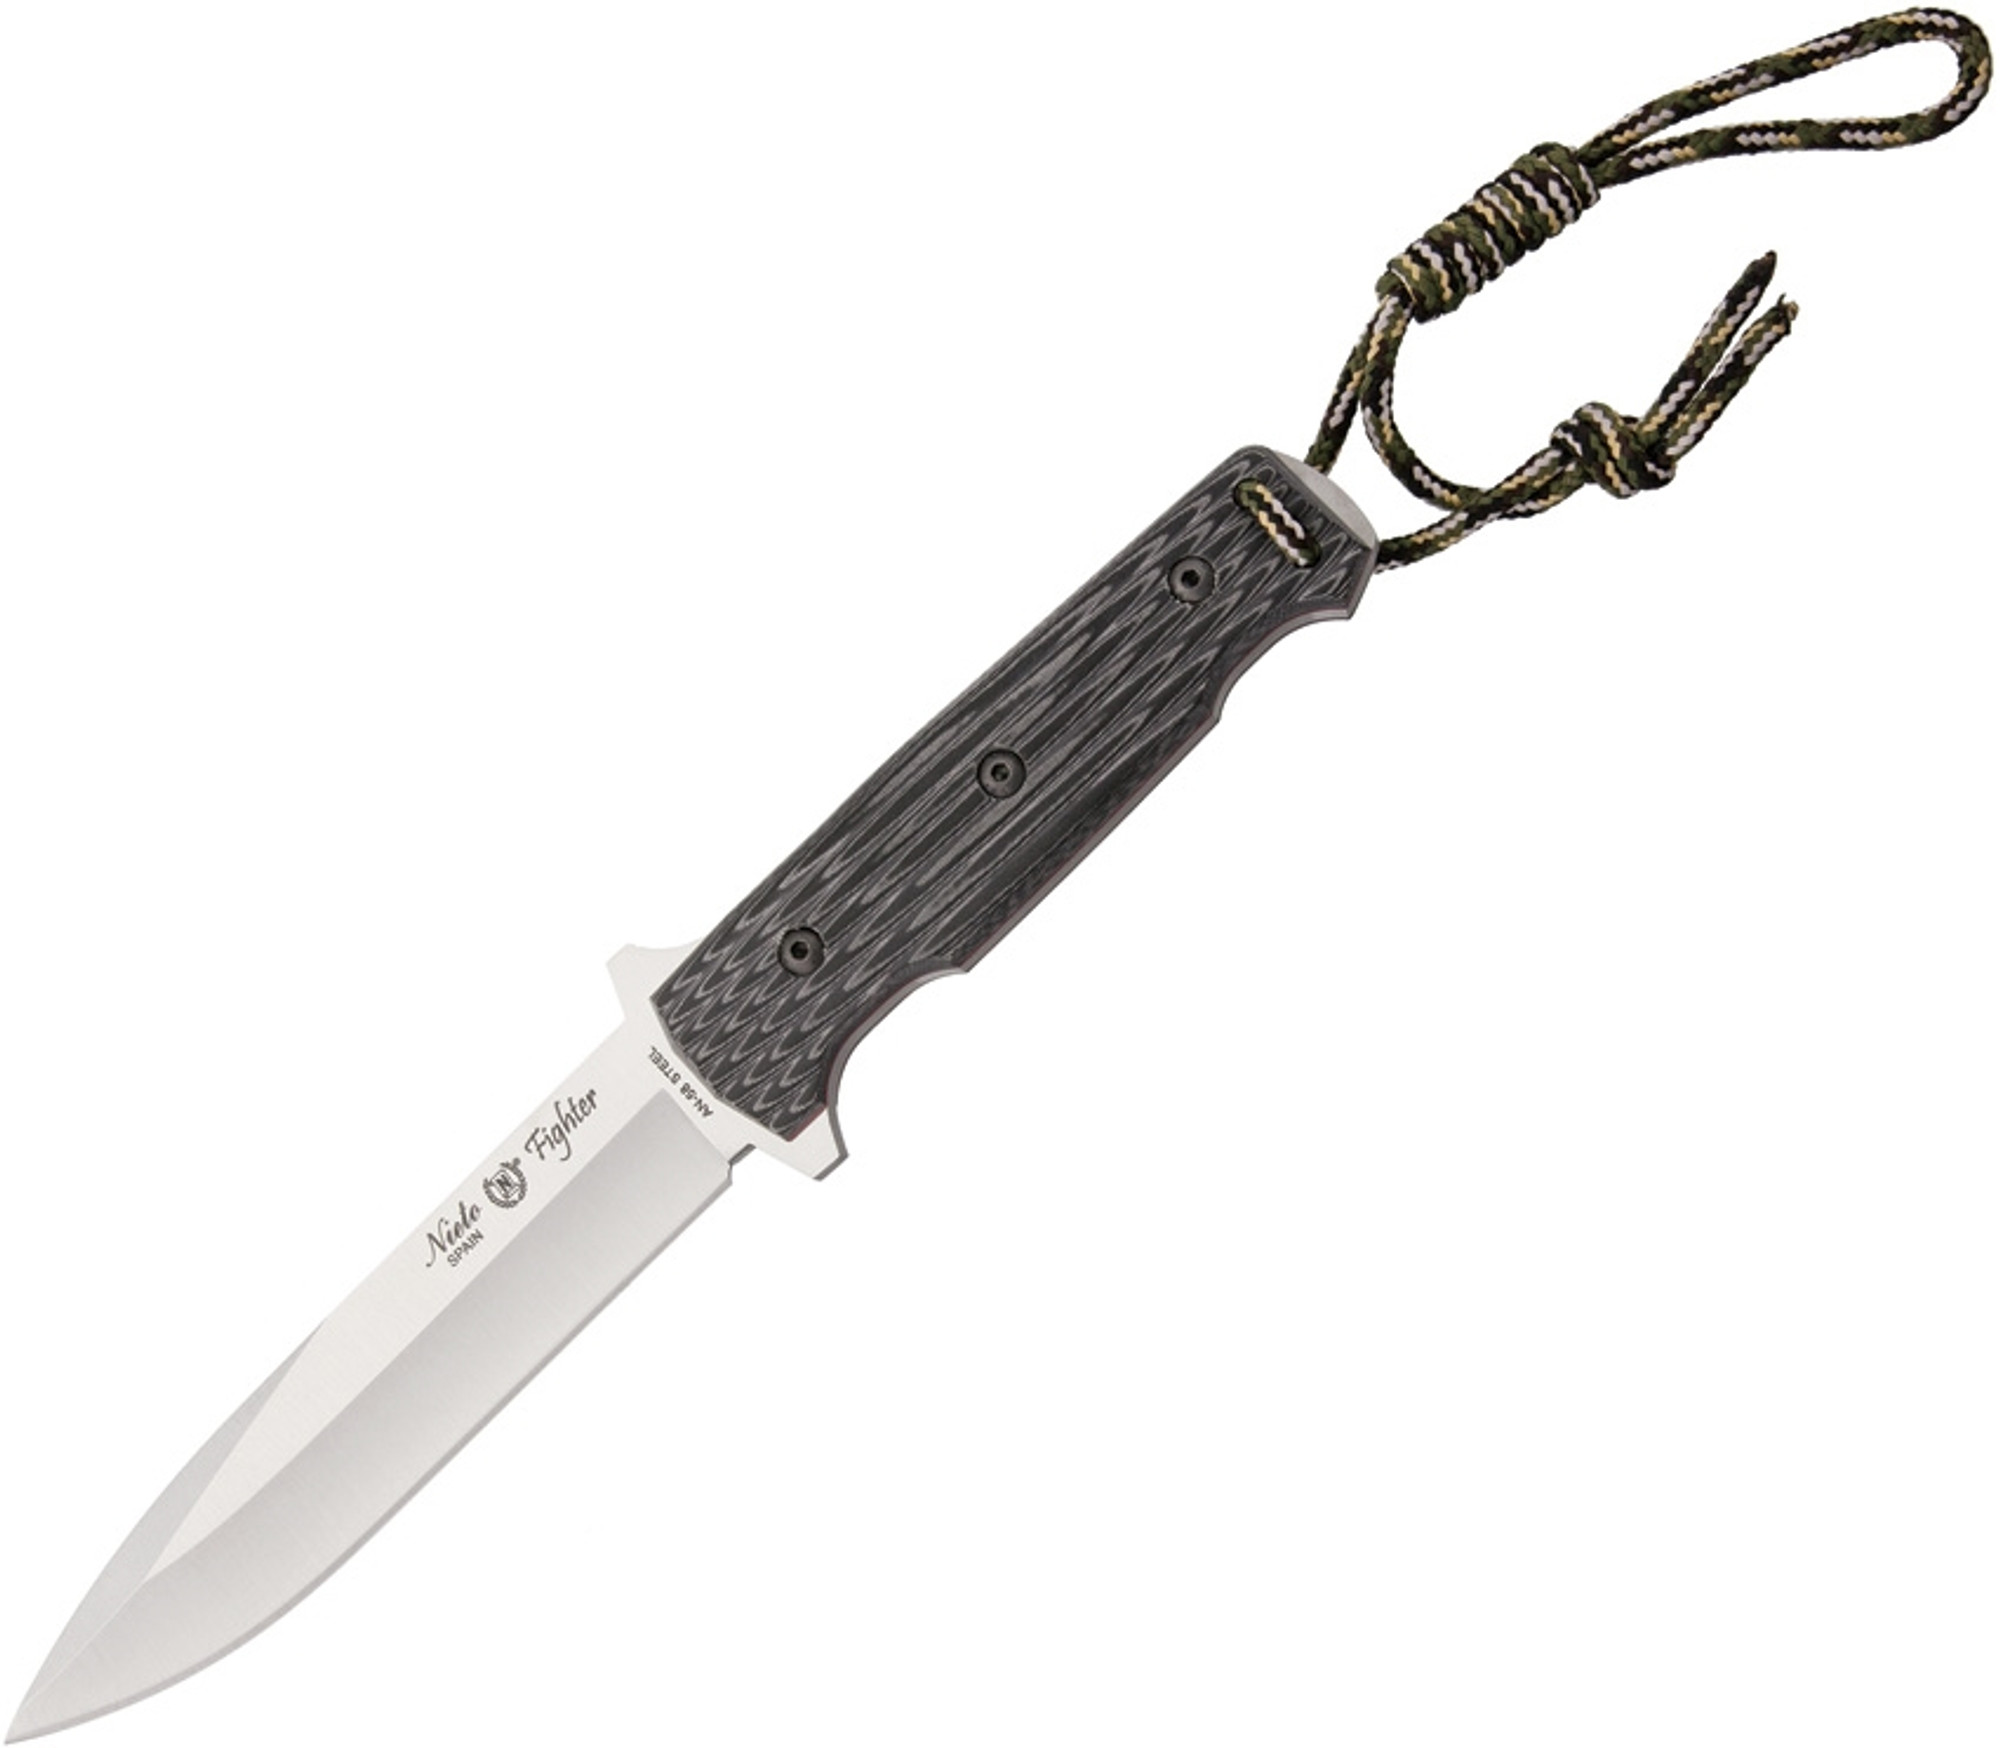 Linea Fighter Fixed Blade